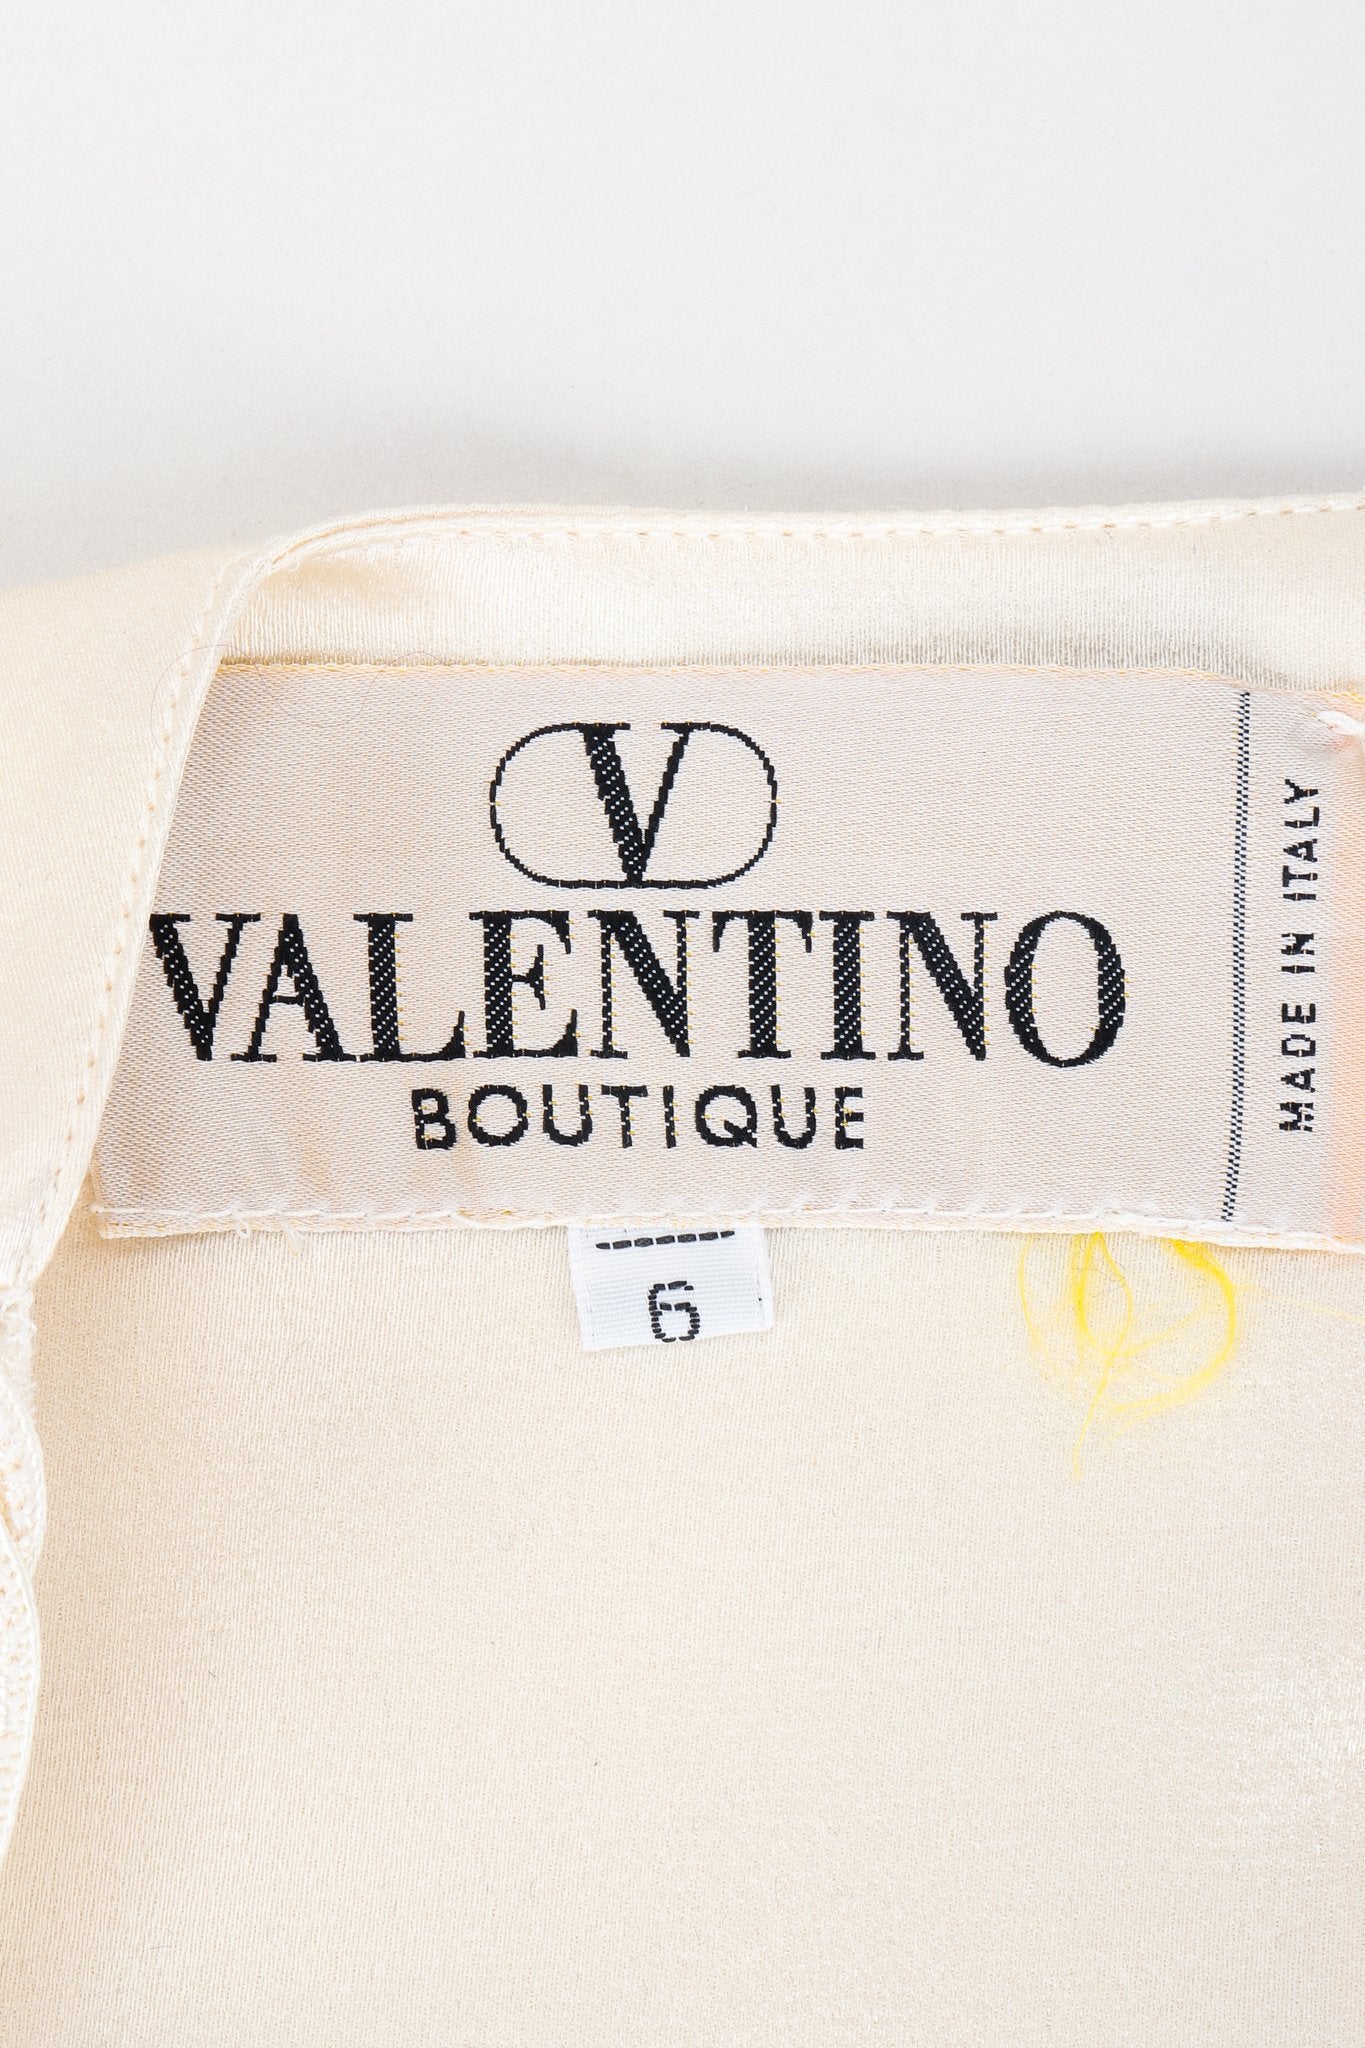 Vintage Valentino Embroidered Overlay Shell Top Label at Recess LA